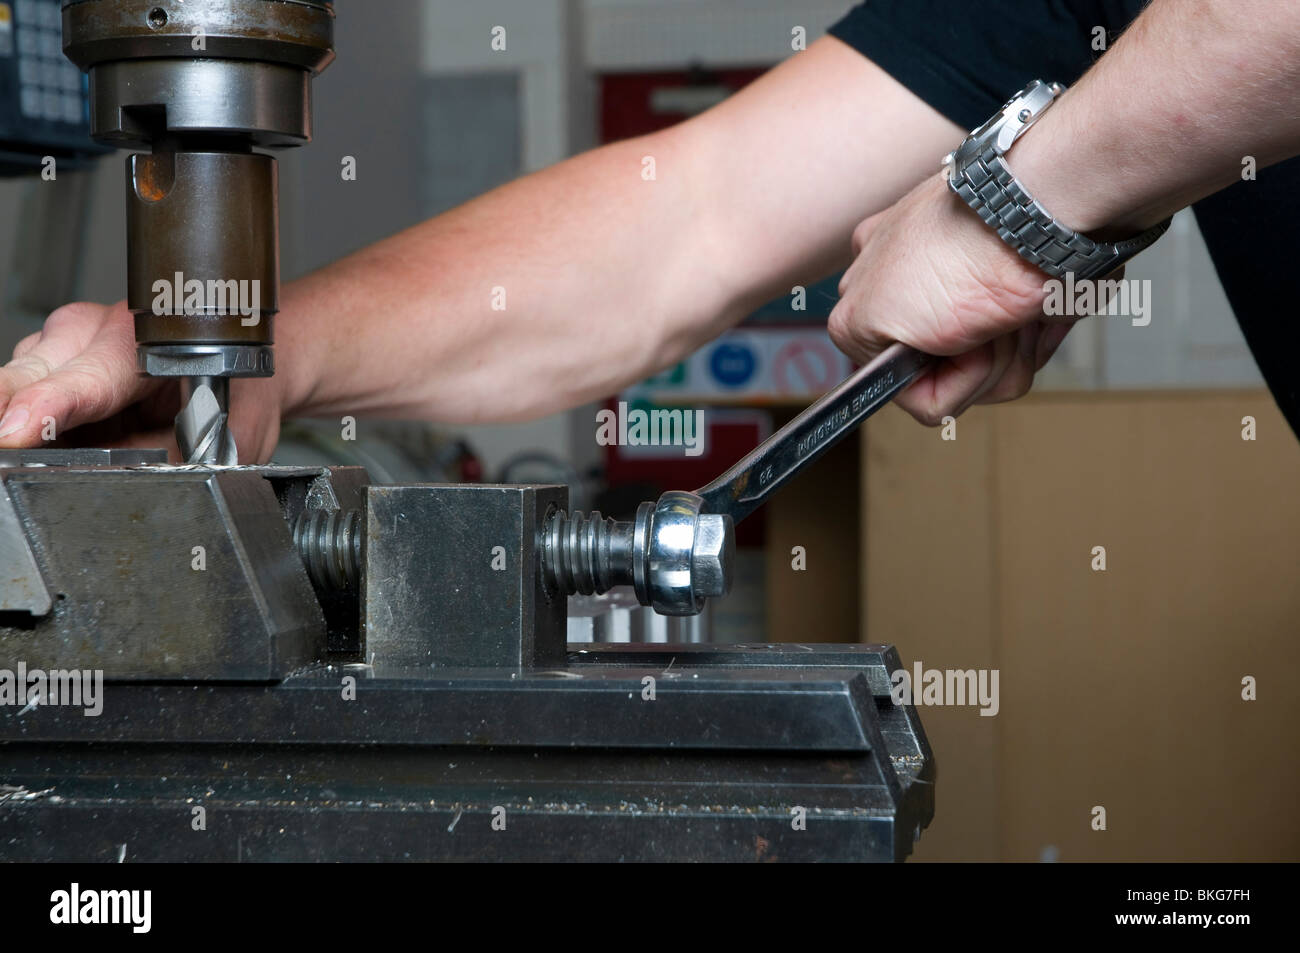 clamping a part in place in a milling machine using a machine vice, tightening with a spanner, precision engineering. Stock Photo